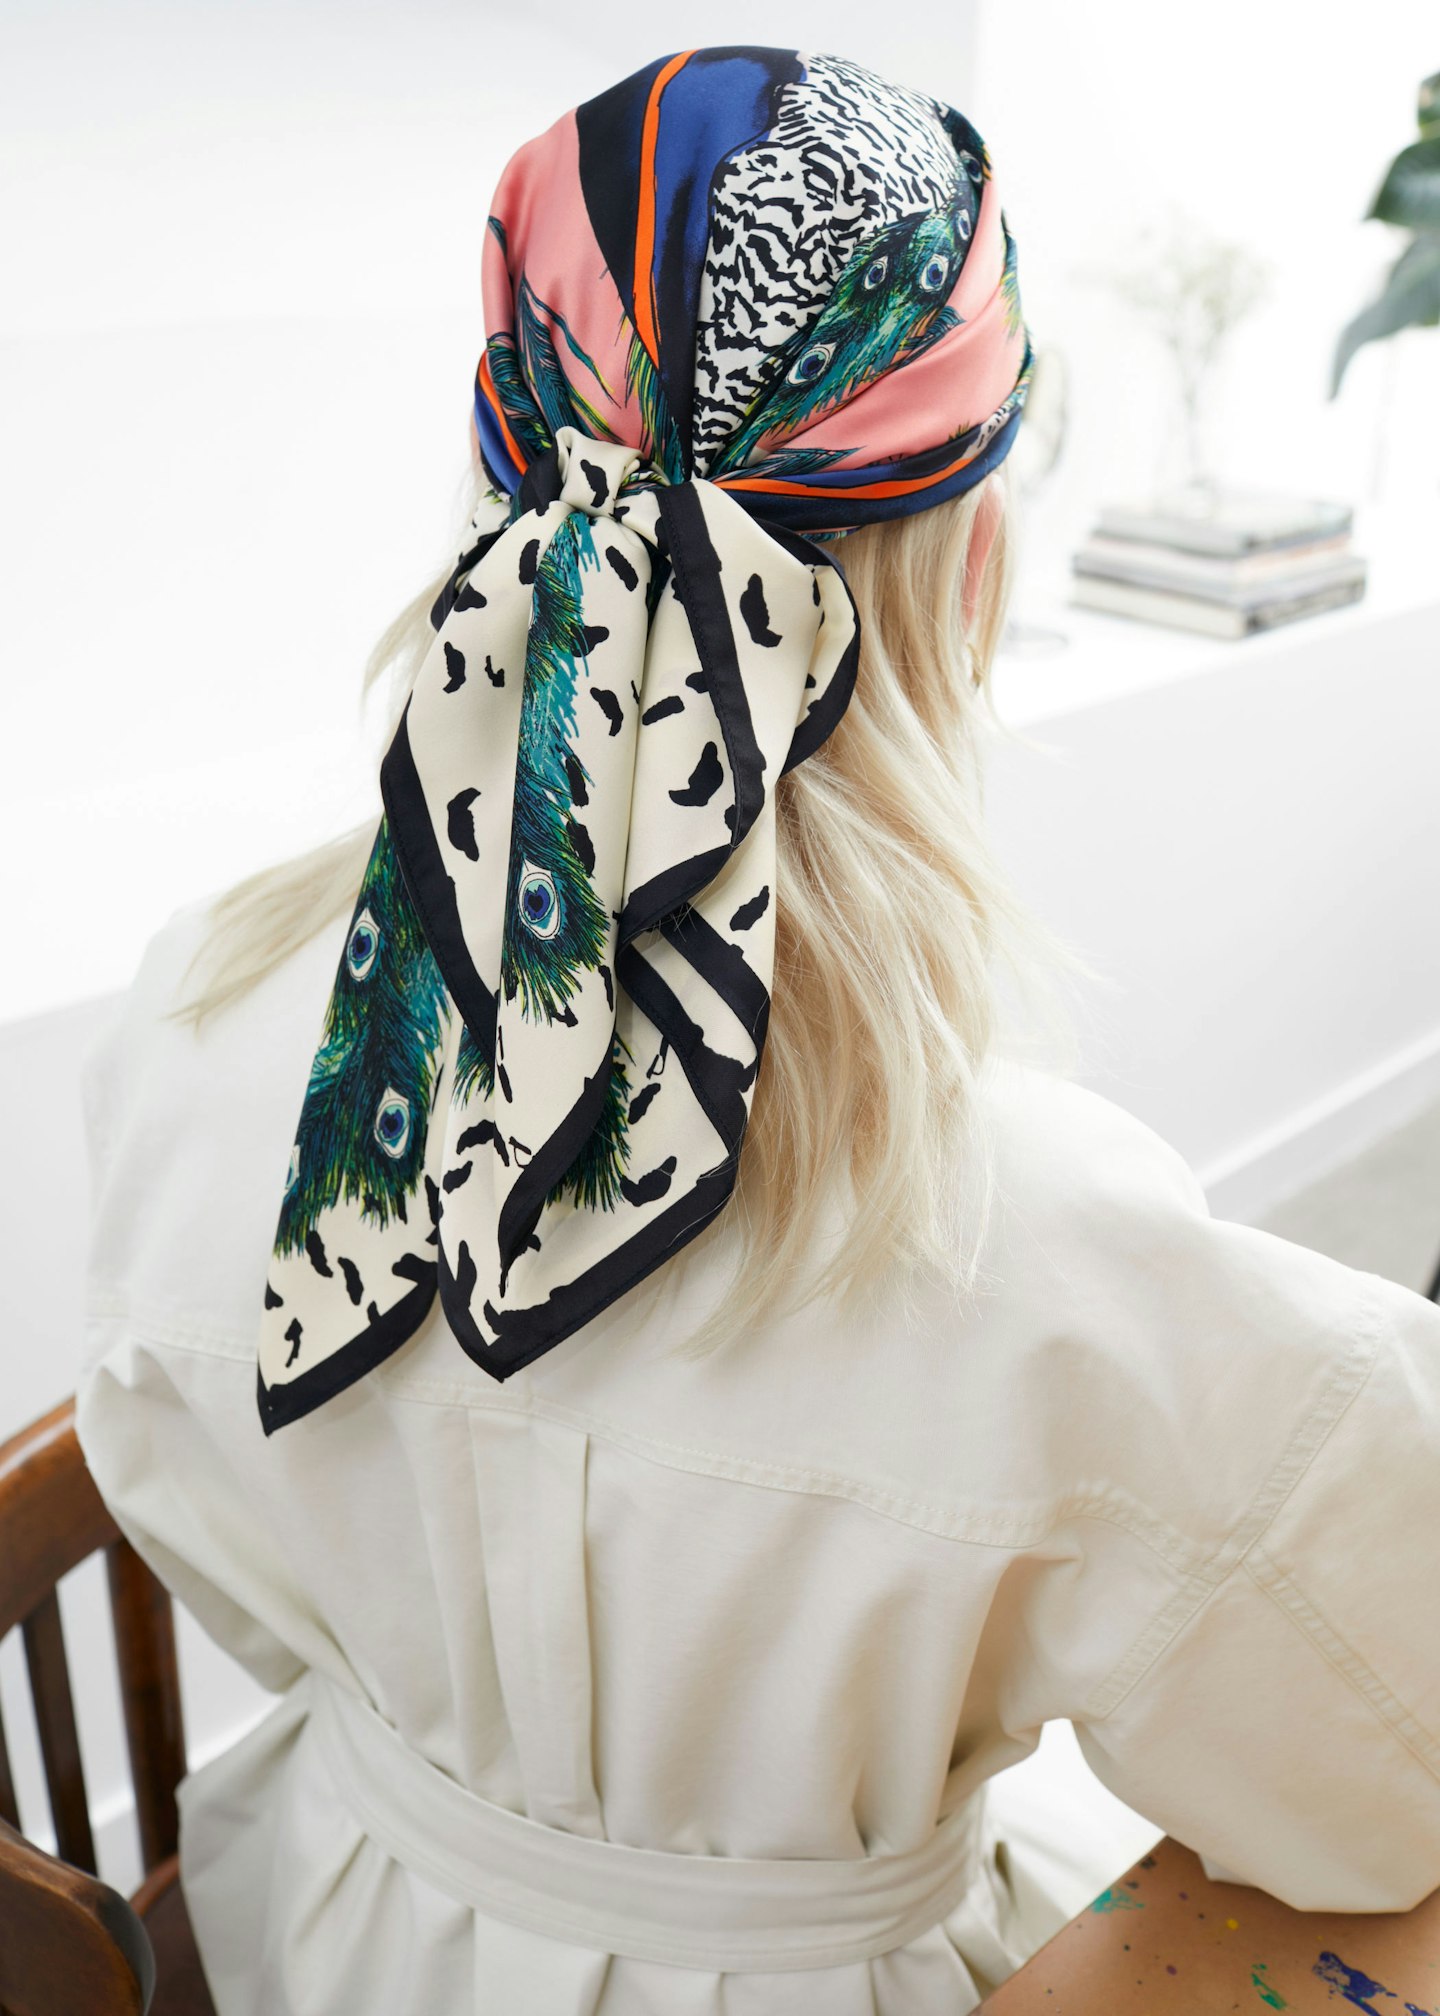 & Other Stories, Peacock Graphic Printed Scarf, £35